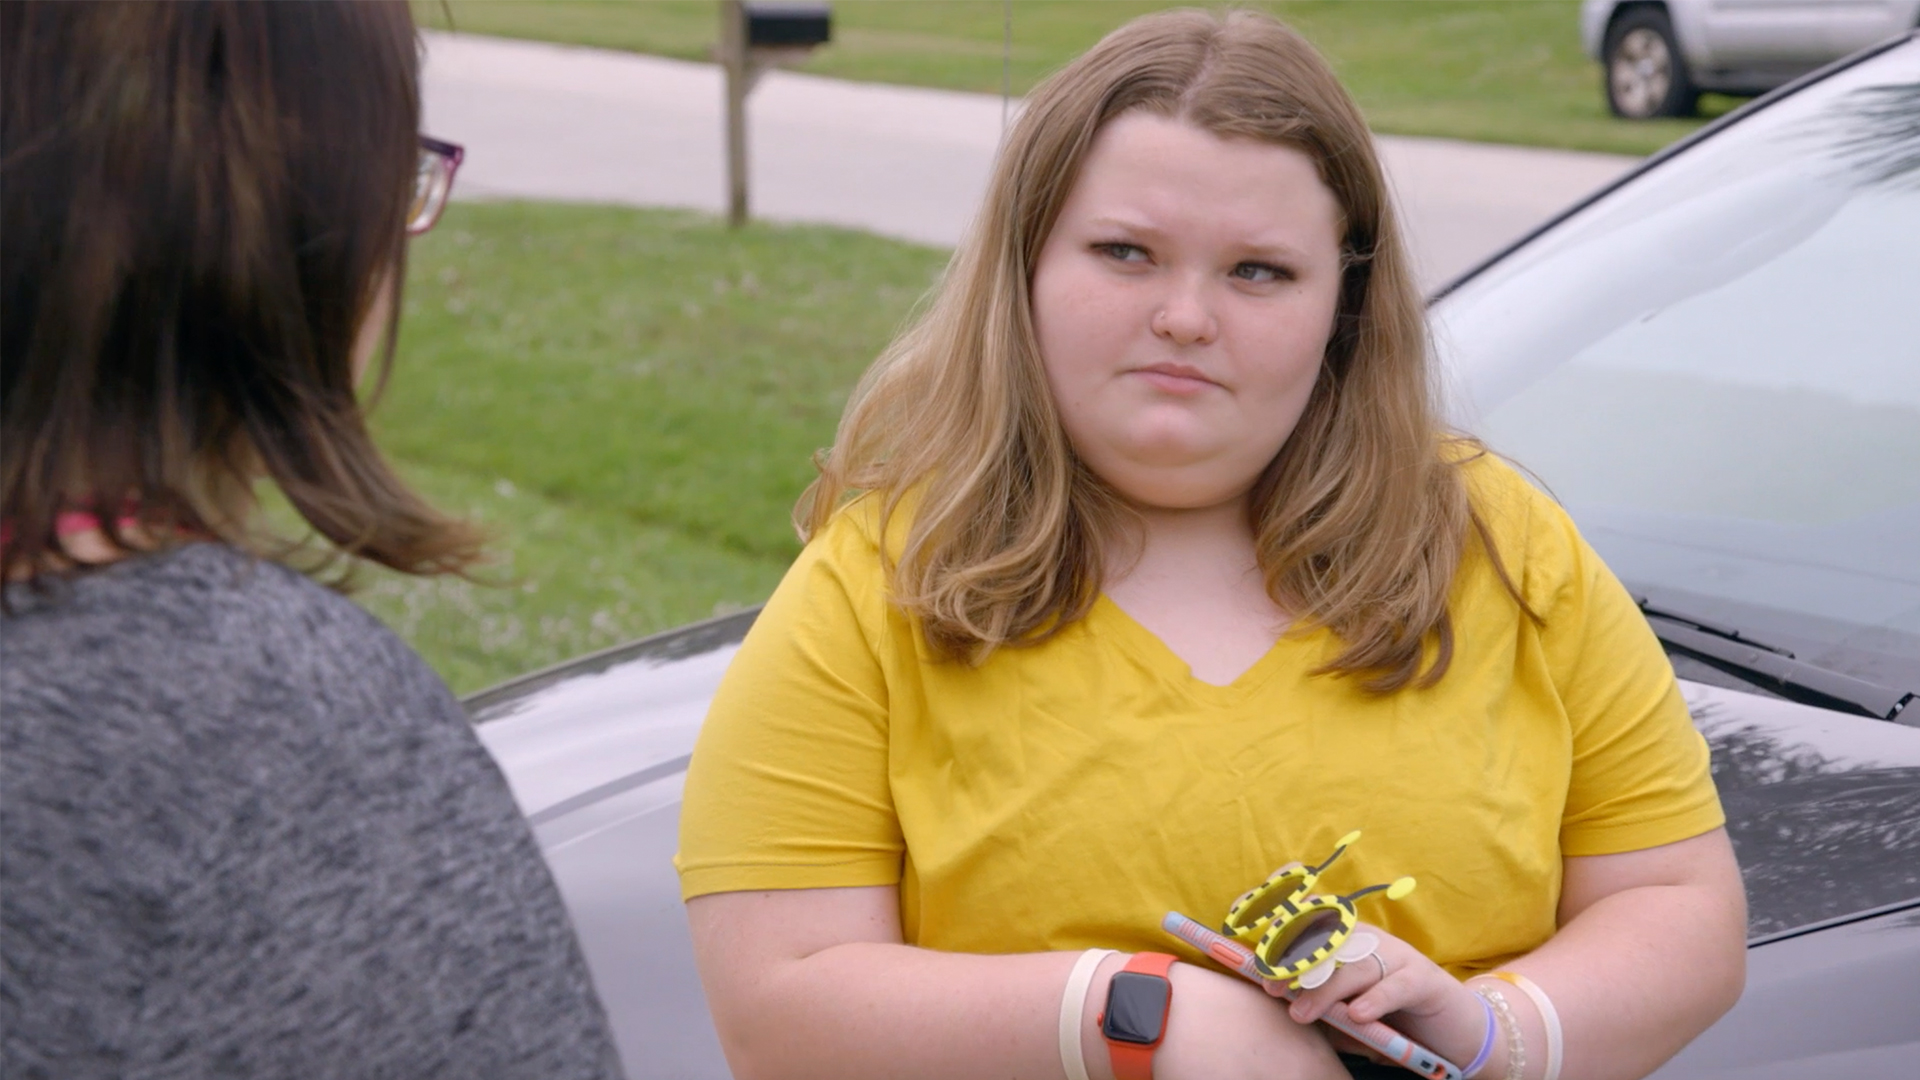 Watch Sneak Peek: Alana Struggles to Trust Geno | Mama June: From Not to Hot Video Extras